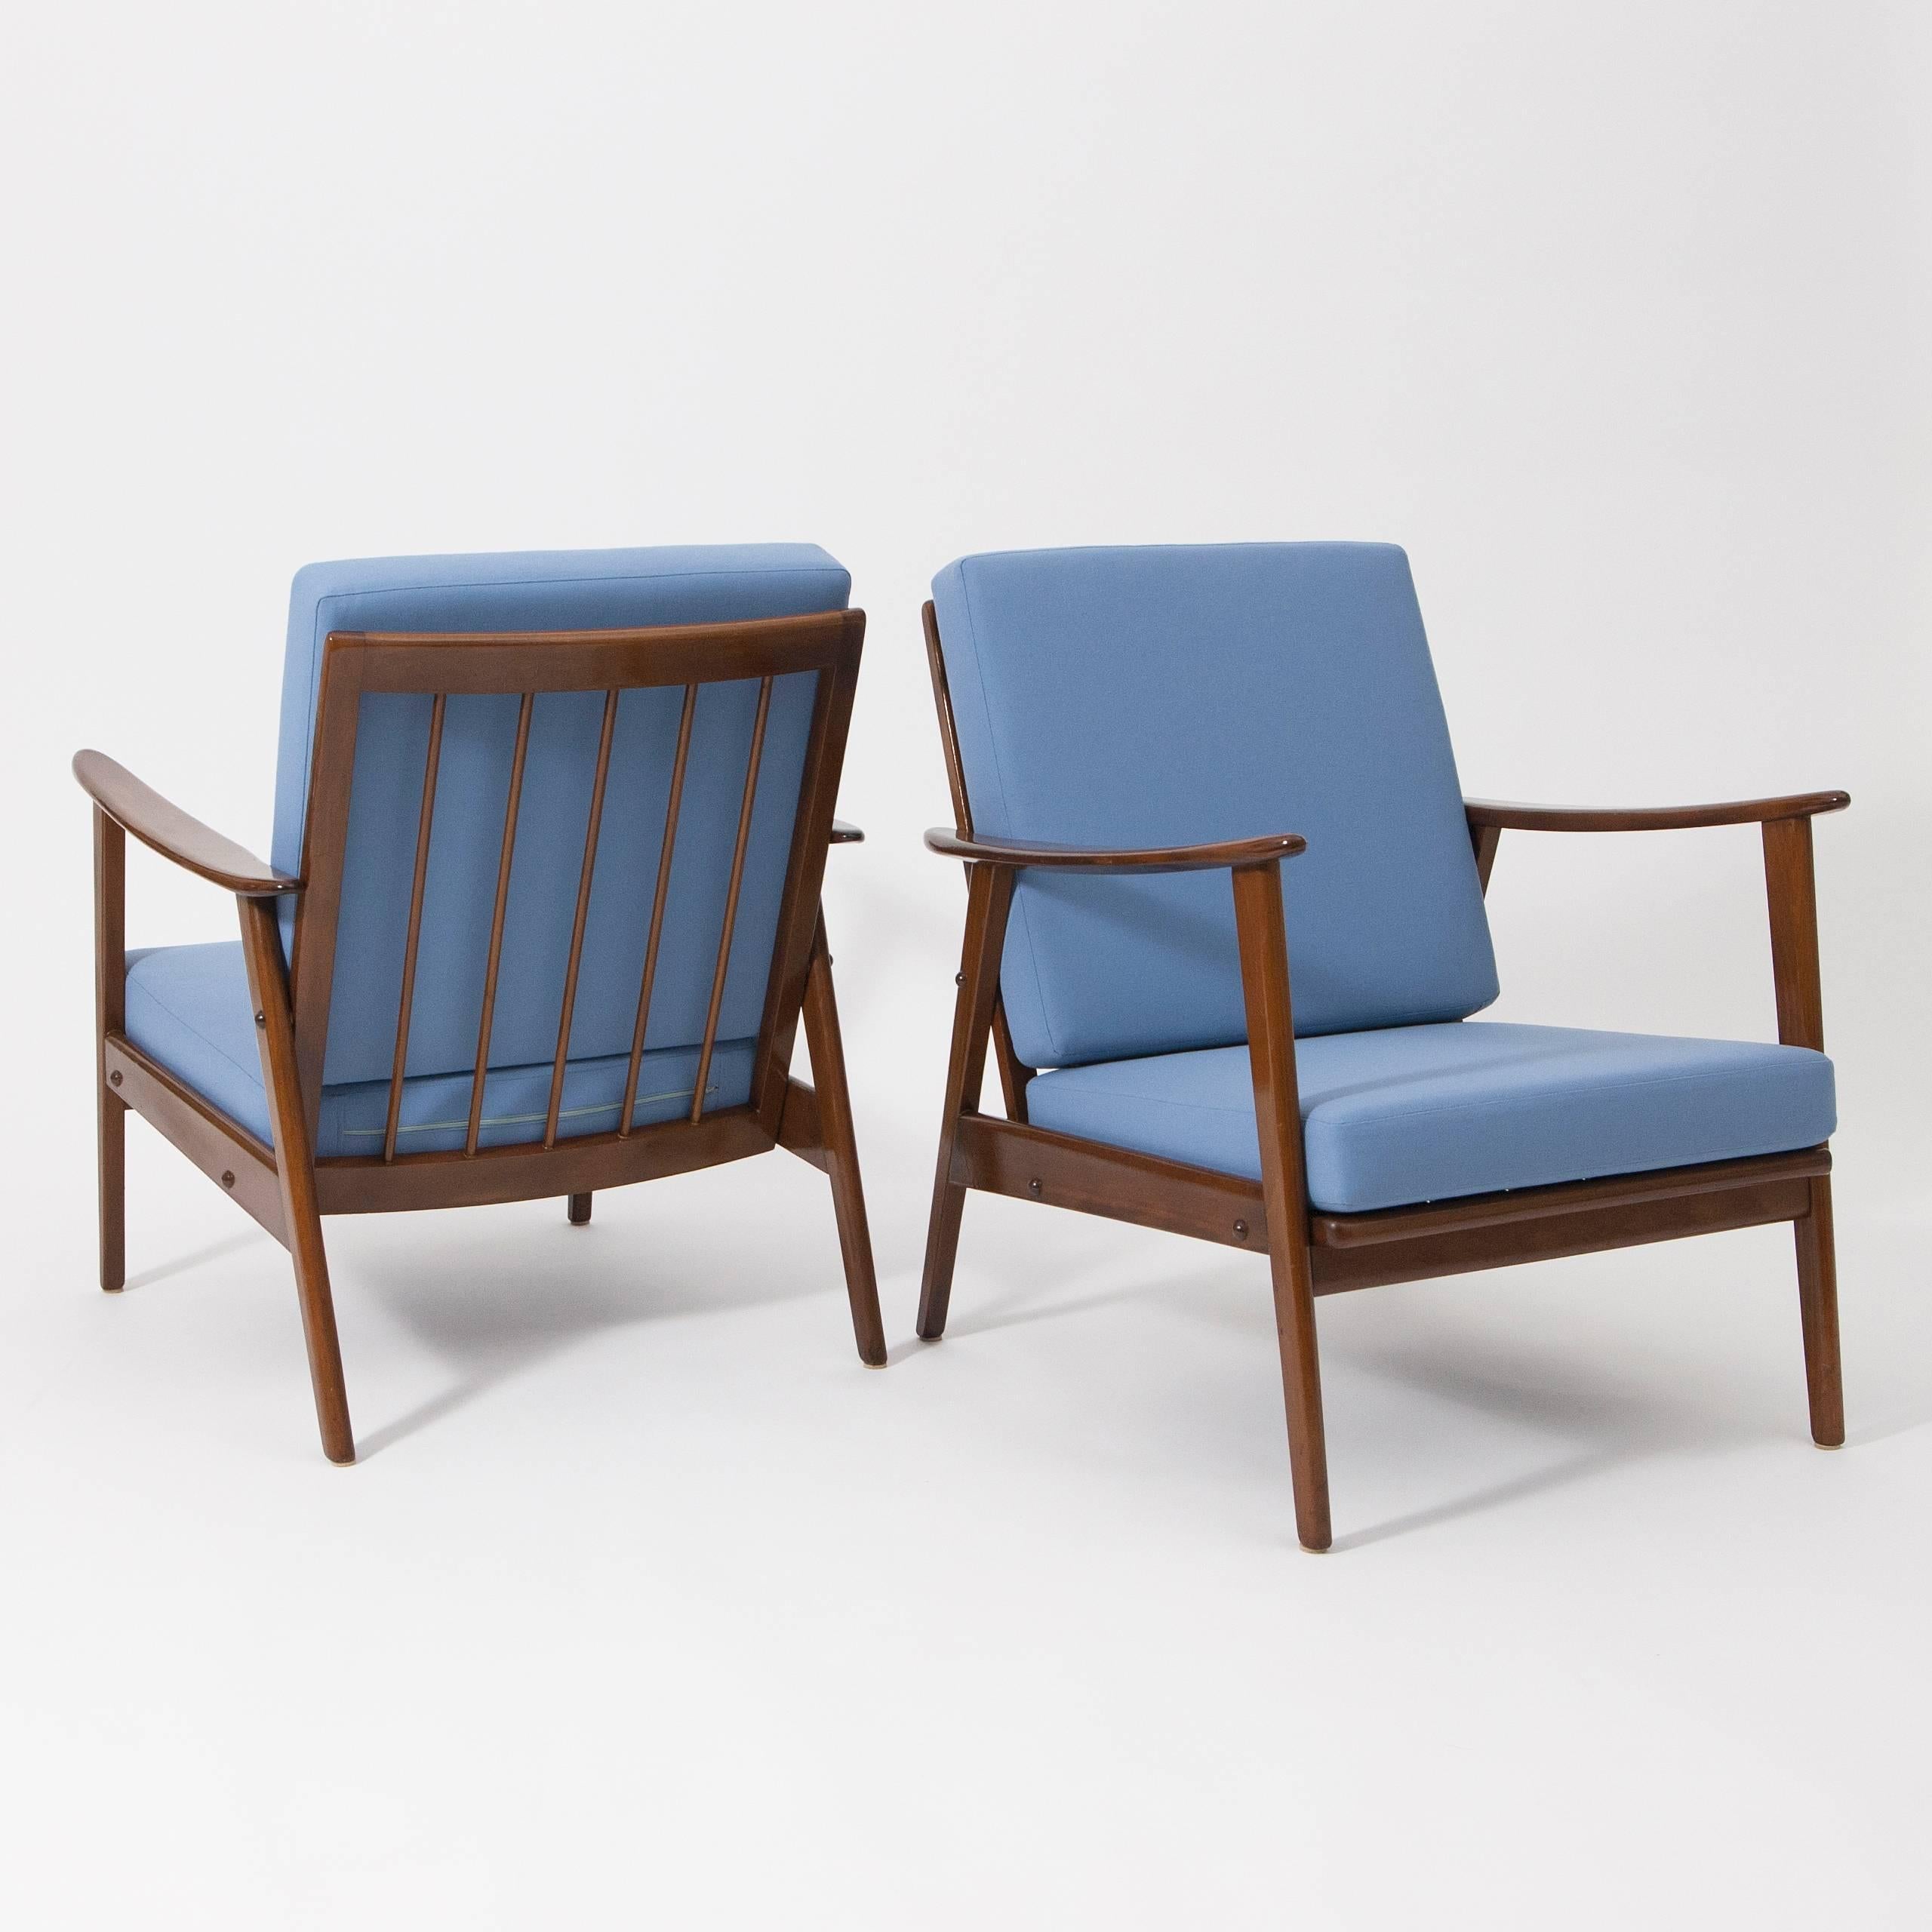 Beautiful pair of Mid-Century Modern easy chairs from the German, 1960s. Frame made of walnut wood, solid construction, re-upholstered with cushions in a high quality soft blue fabric.
Excellent condition.